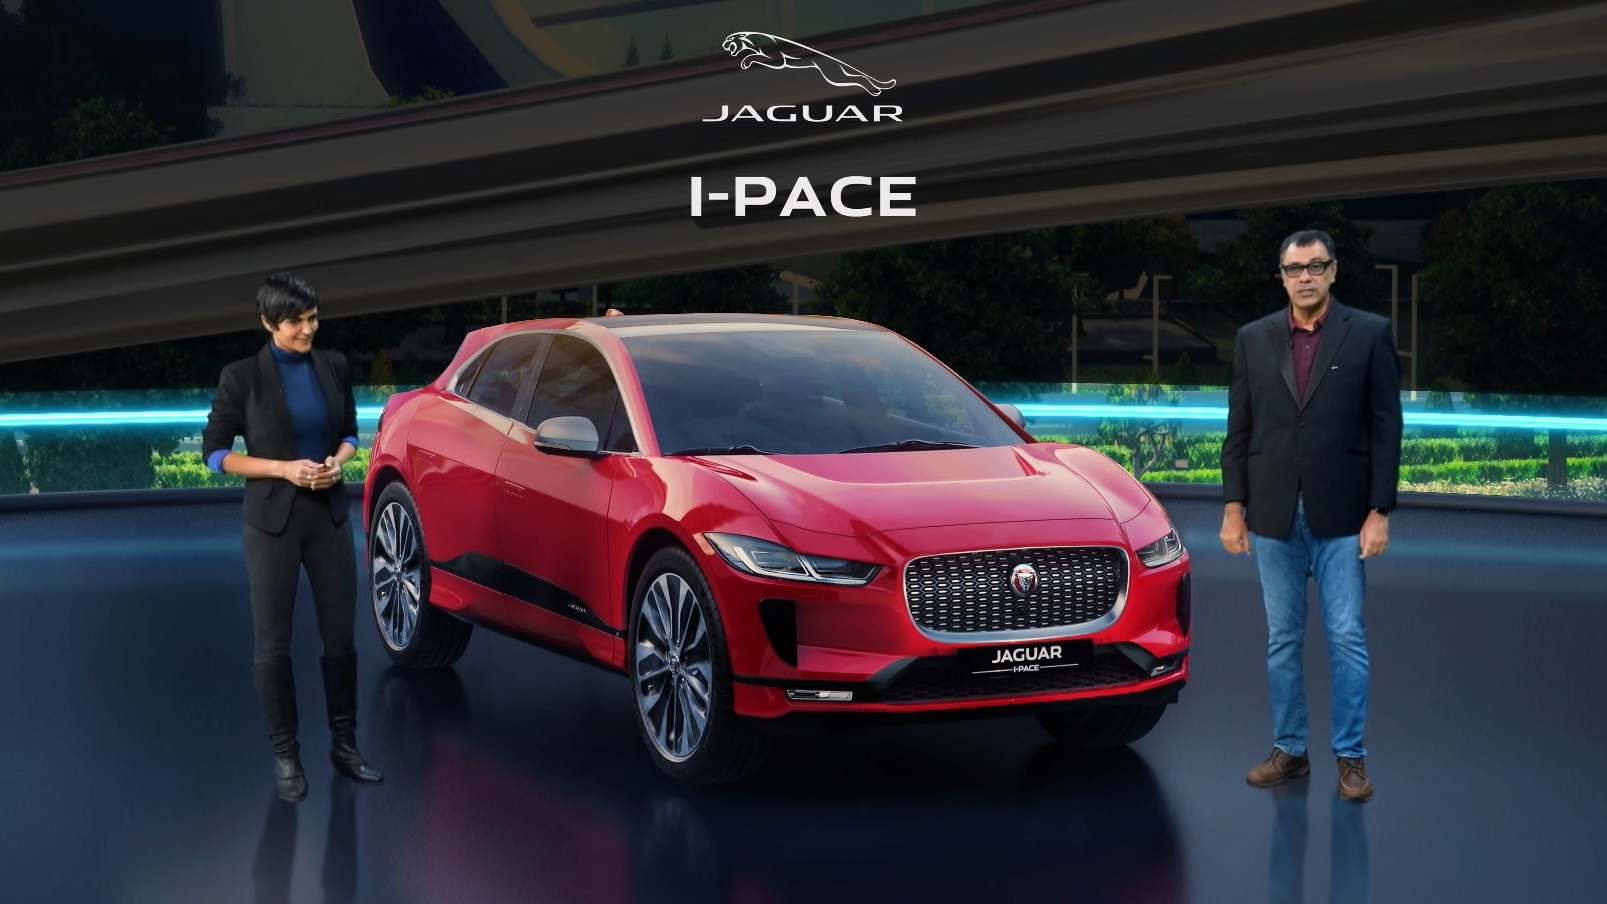  Jaguar I-Pace electric SUV launched in India, priced from Rs 1.06 crore